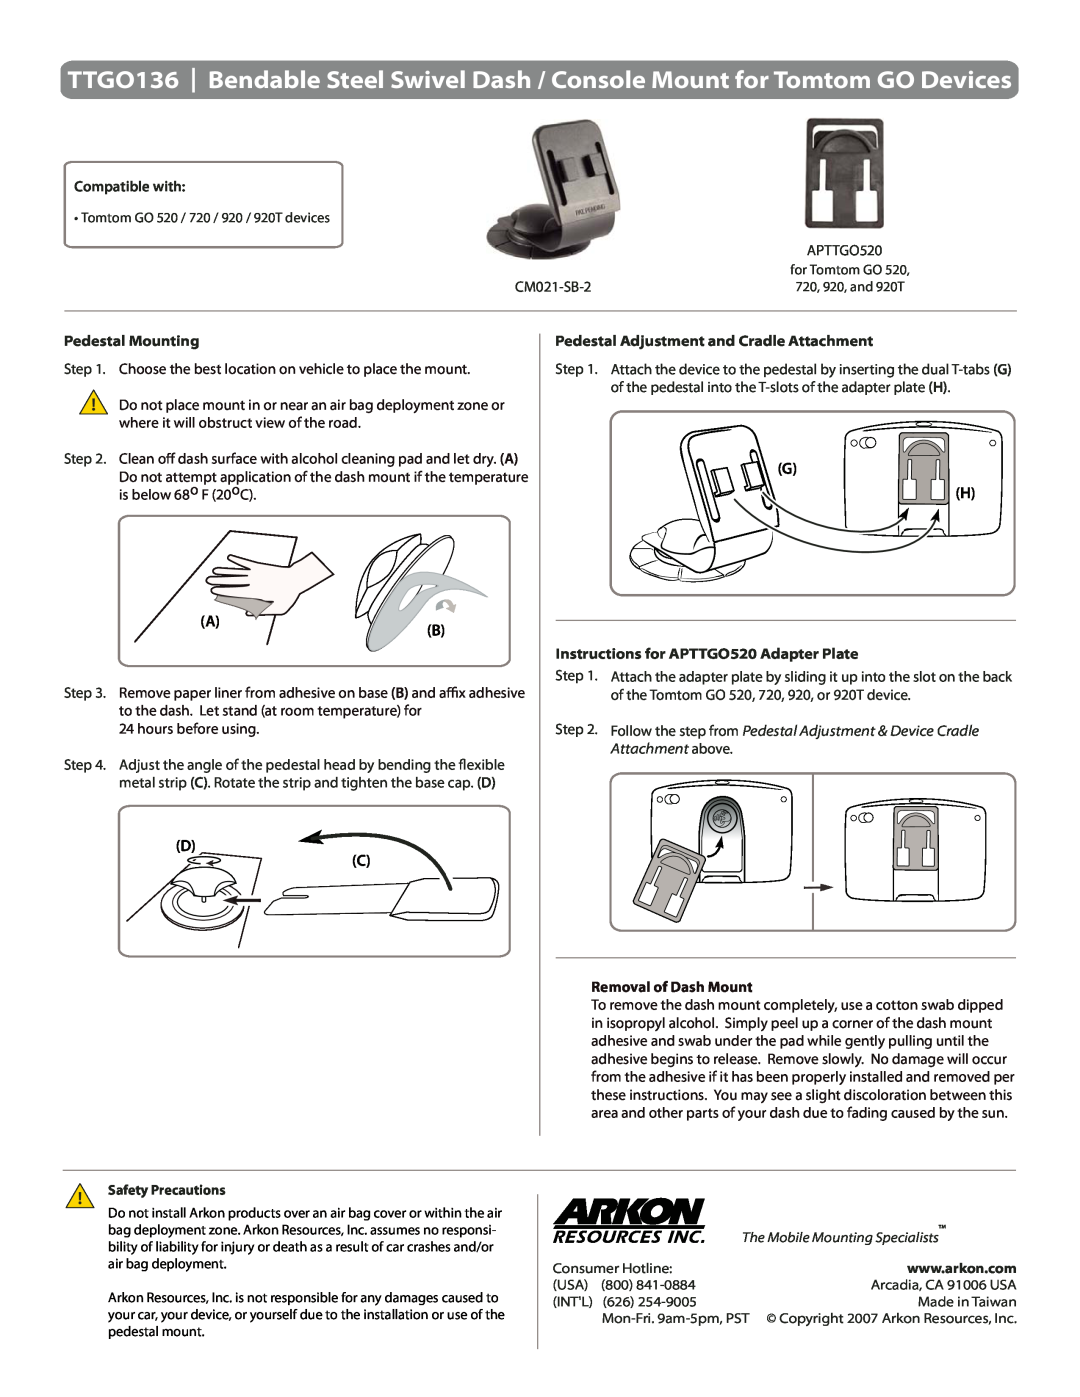 Arkon TTGO136 manual Compatible with, Pedestal Mounting, Pedestal Adjustment and Cradle Attachment, Removal of Dash Mount 